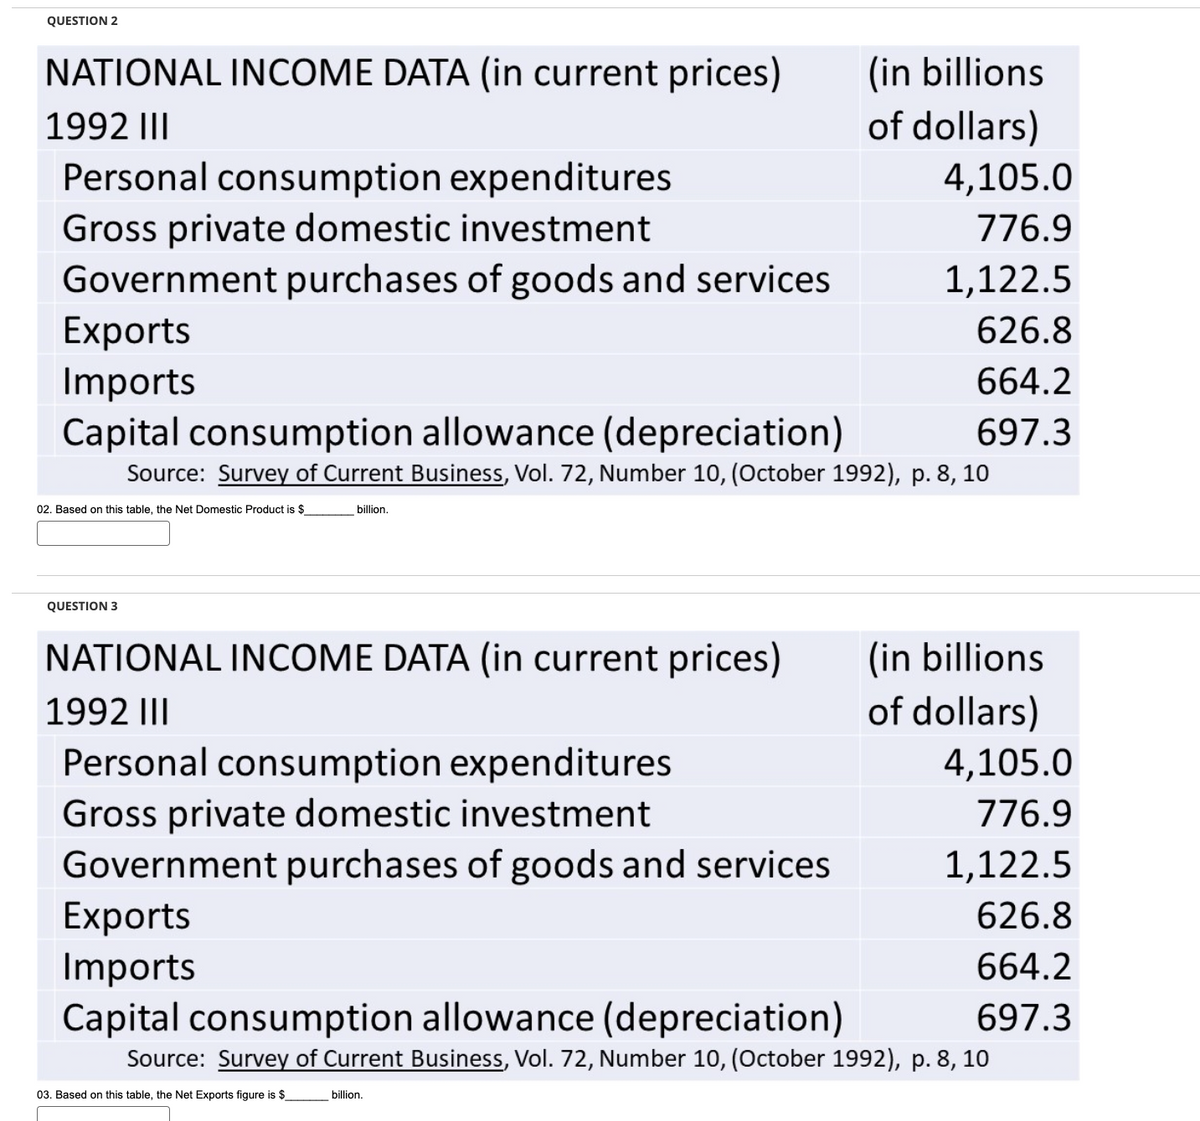 QUESTION 2
NATIONAL INCOME DATA (in current prices)
1992 III
Personal consumption expenditures
Gross private domestic investment
Government purchases of goods and services
02. Based on this table, the Net Domestic Product is $
Exports
Imports
Capital consumption allowance (depreciation)
Source: Survey of Current Business, Vol. 72, Number 10, (October 1992), p. 8, 10
QUESTION 3
billion.
NATIONAL INCOME DATA (in current prices)
1992 III
Personal consumption expenditures
Gross private domestic investment
Government purchases of goods and services
03. Based on this table, the Net Exports figure is $
(in billions
of dollars)
4,105.0
776.9
1,122.5
626.8
664.2
697.3
billion.
(in billions
of dollars)
Exports
Imports
Capital consumption allowance (depreciation)
Source: Survey of Current Business, Vol. 72, Number 10, (October 1992), p. 8, 10
4,105.0
776.9
1,122.5
626.8
664.2
697.3